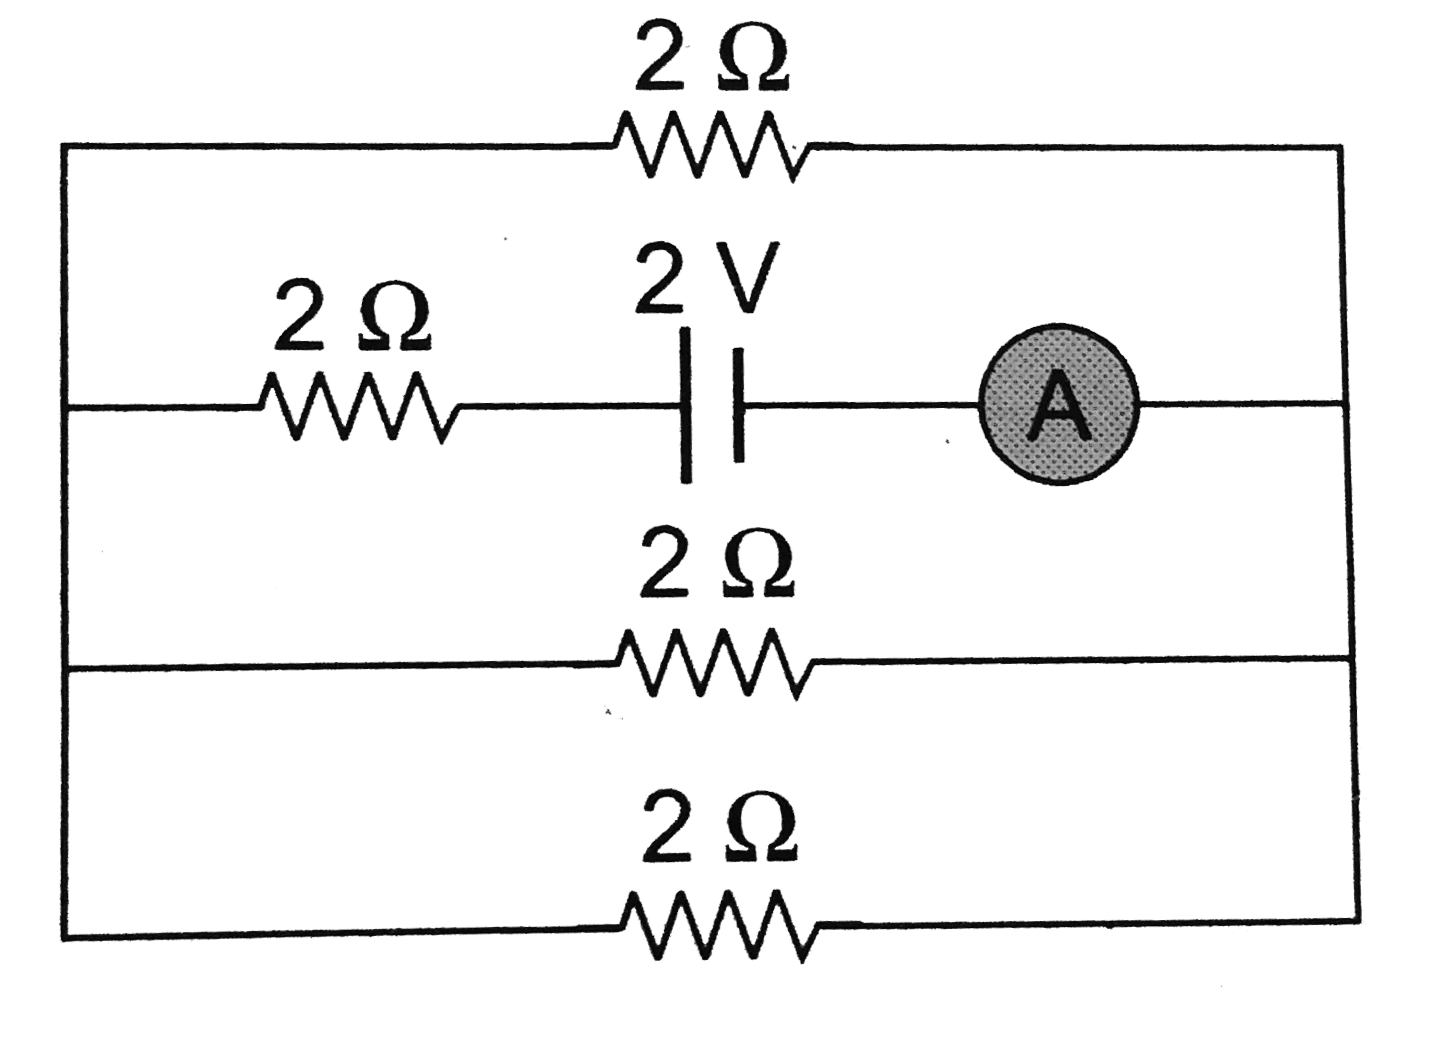 The reading of the ammeter as per figure shown is